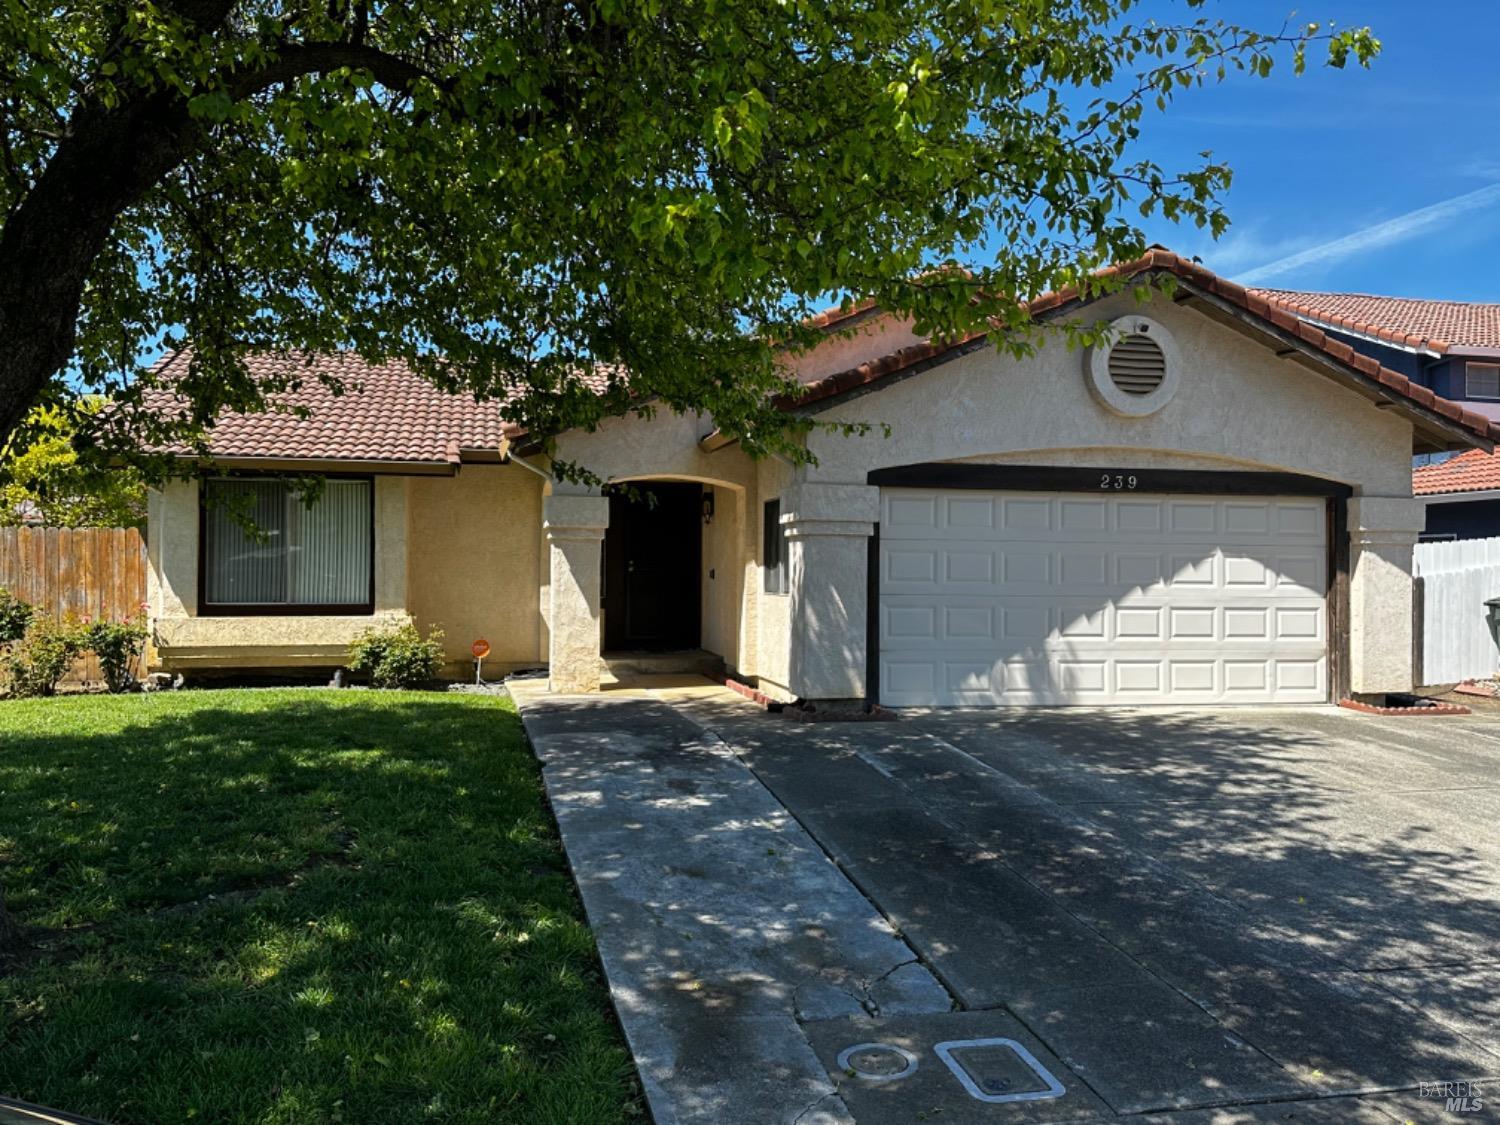 Photo of 239 Catalina Wy in Vallejo, CA